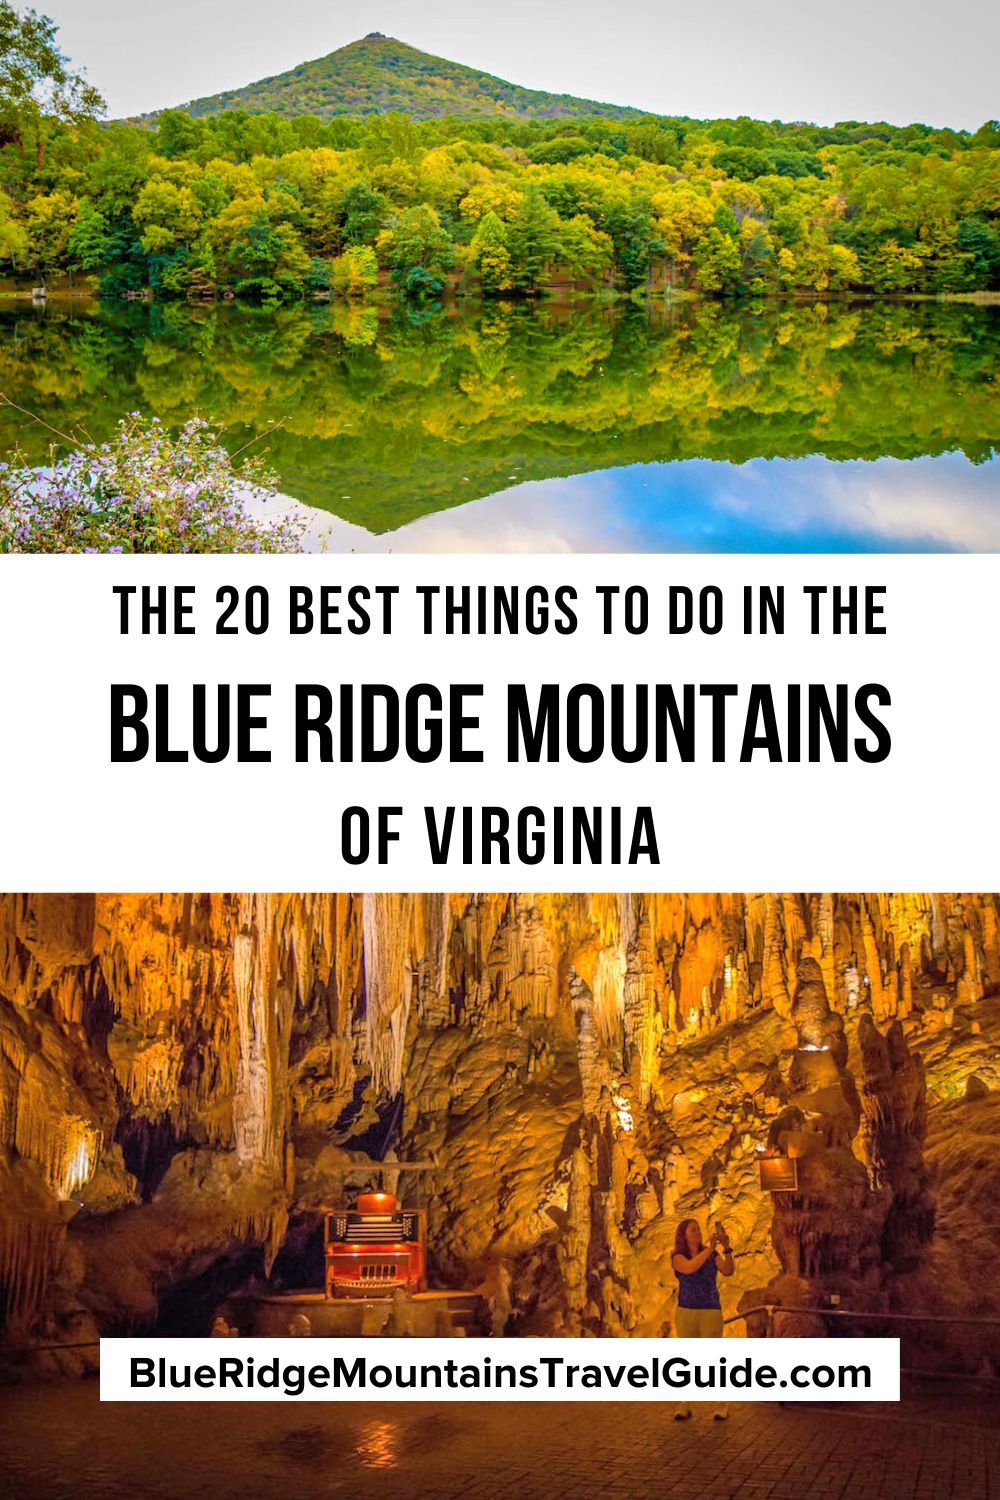 20 Things to Do in the Virginia Blue Ridge Mountains, ranging top hikes to the most interesting museums to jamming at the best music venues. | virginia mountains | blue ridge mountains virginia | mountains in virginia | blue ridge mountains va | mountain ranges in virginia | virginia blue ridge mountains | appalachian mountains in virginia | mountains of virginia | virginia's blue ridge | blue ridge mountains in virginia | blue ridge mountains in va | blue ridge mountains of va |